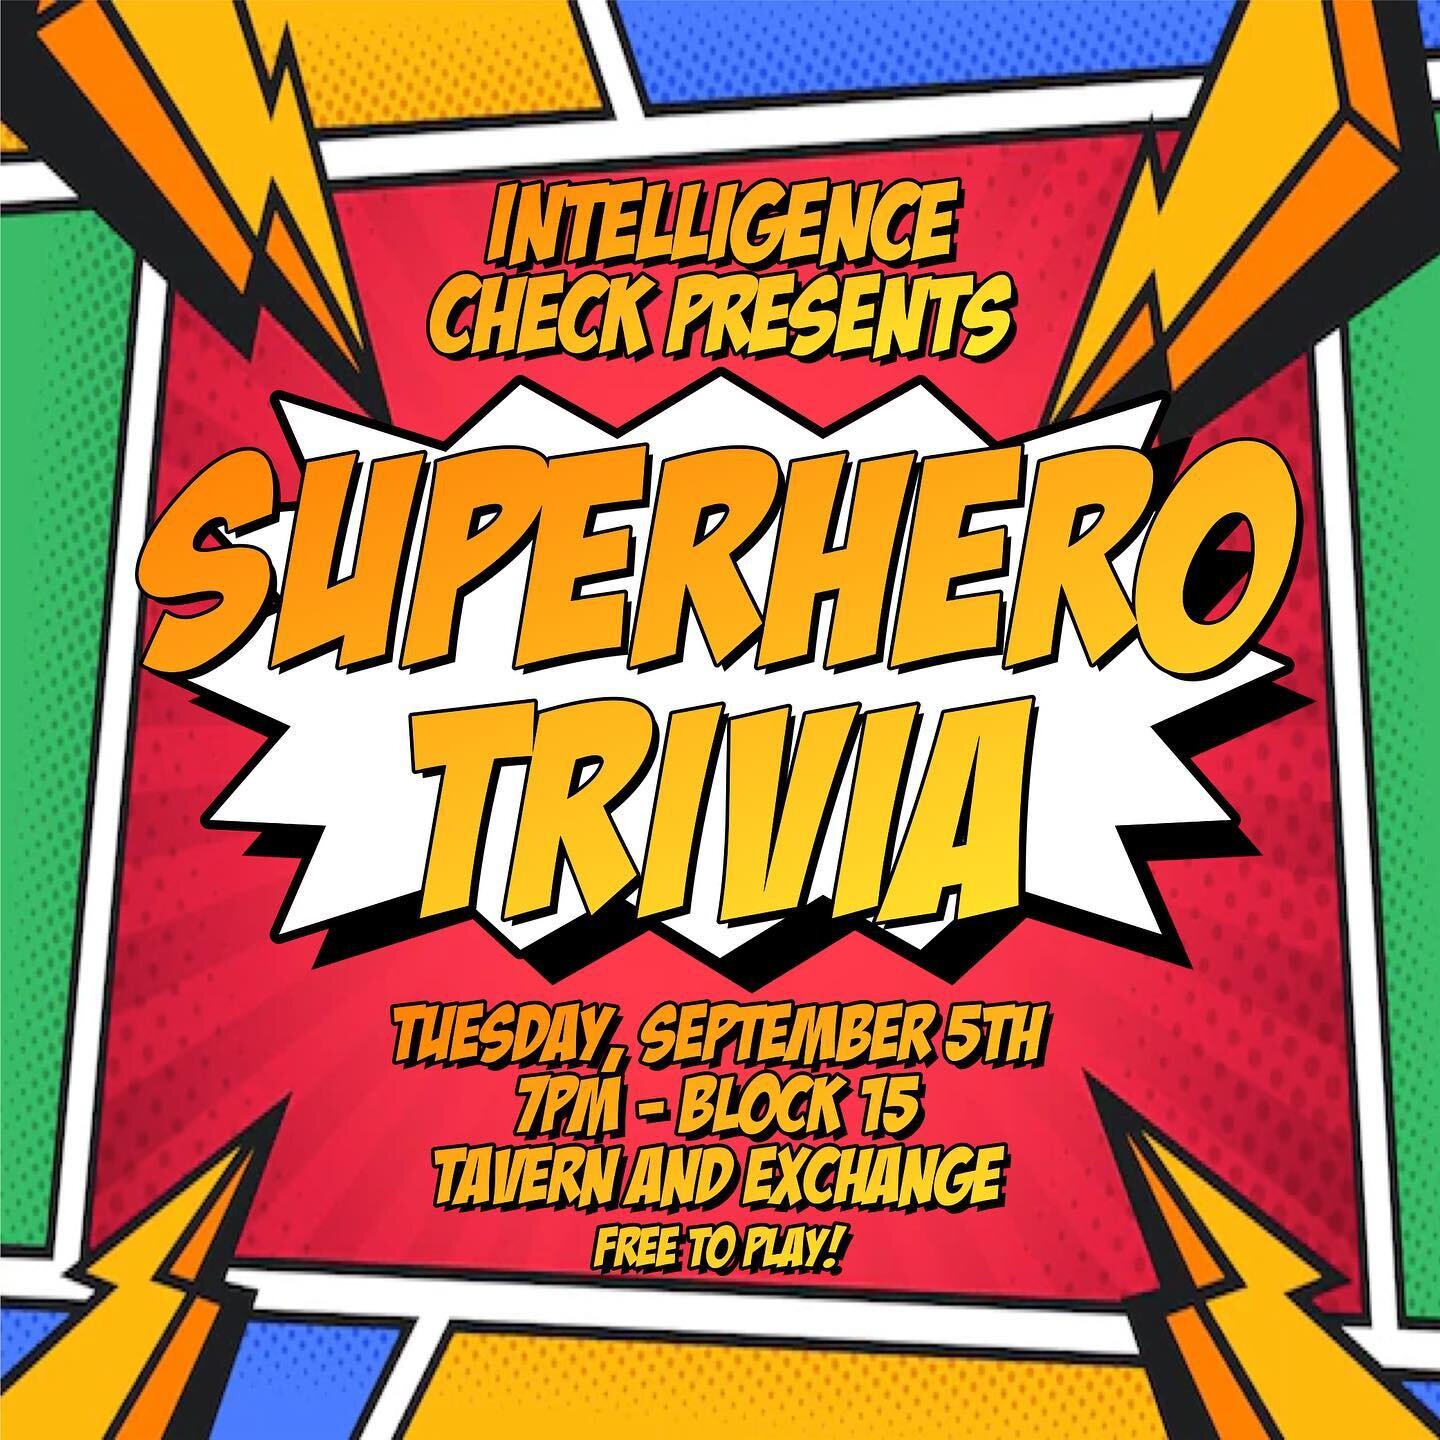 TRIVIA NIGHT ALERT.

We&rsquo;ve got a SUPER night planned for you! On Tuesday, September 5th, join us for SUPERHERO TRIVIA at @block15_kc! Reserve your table now!